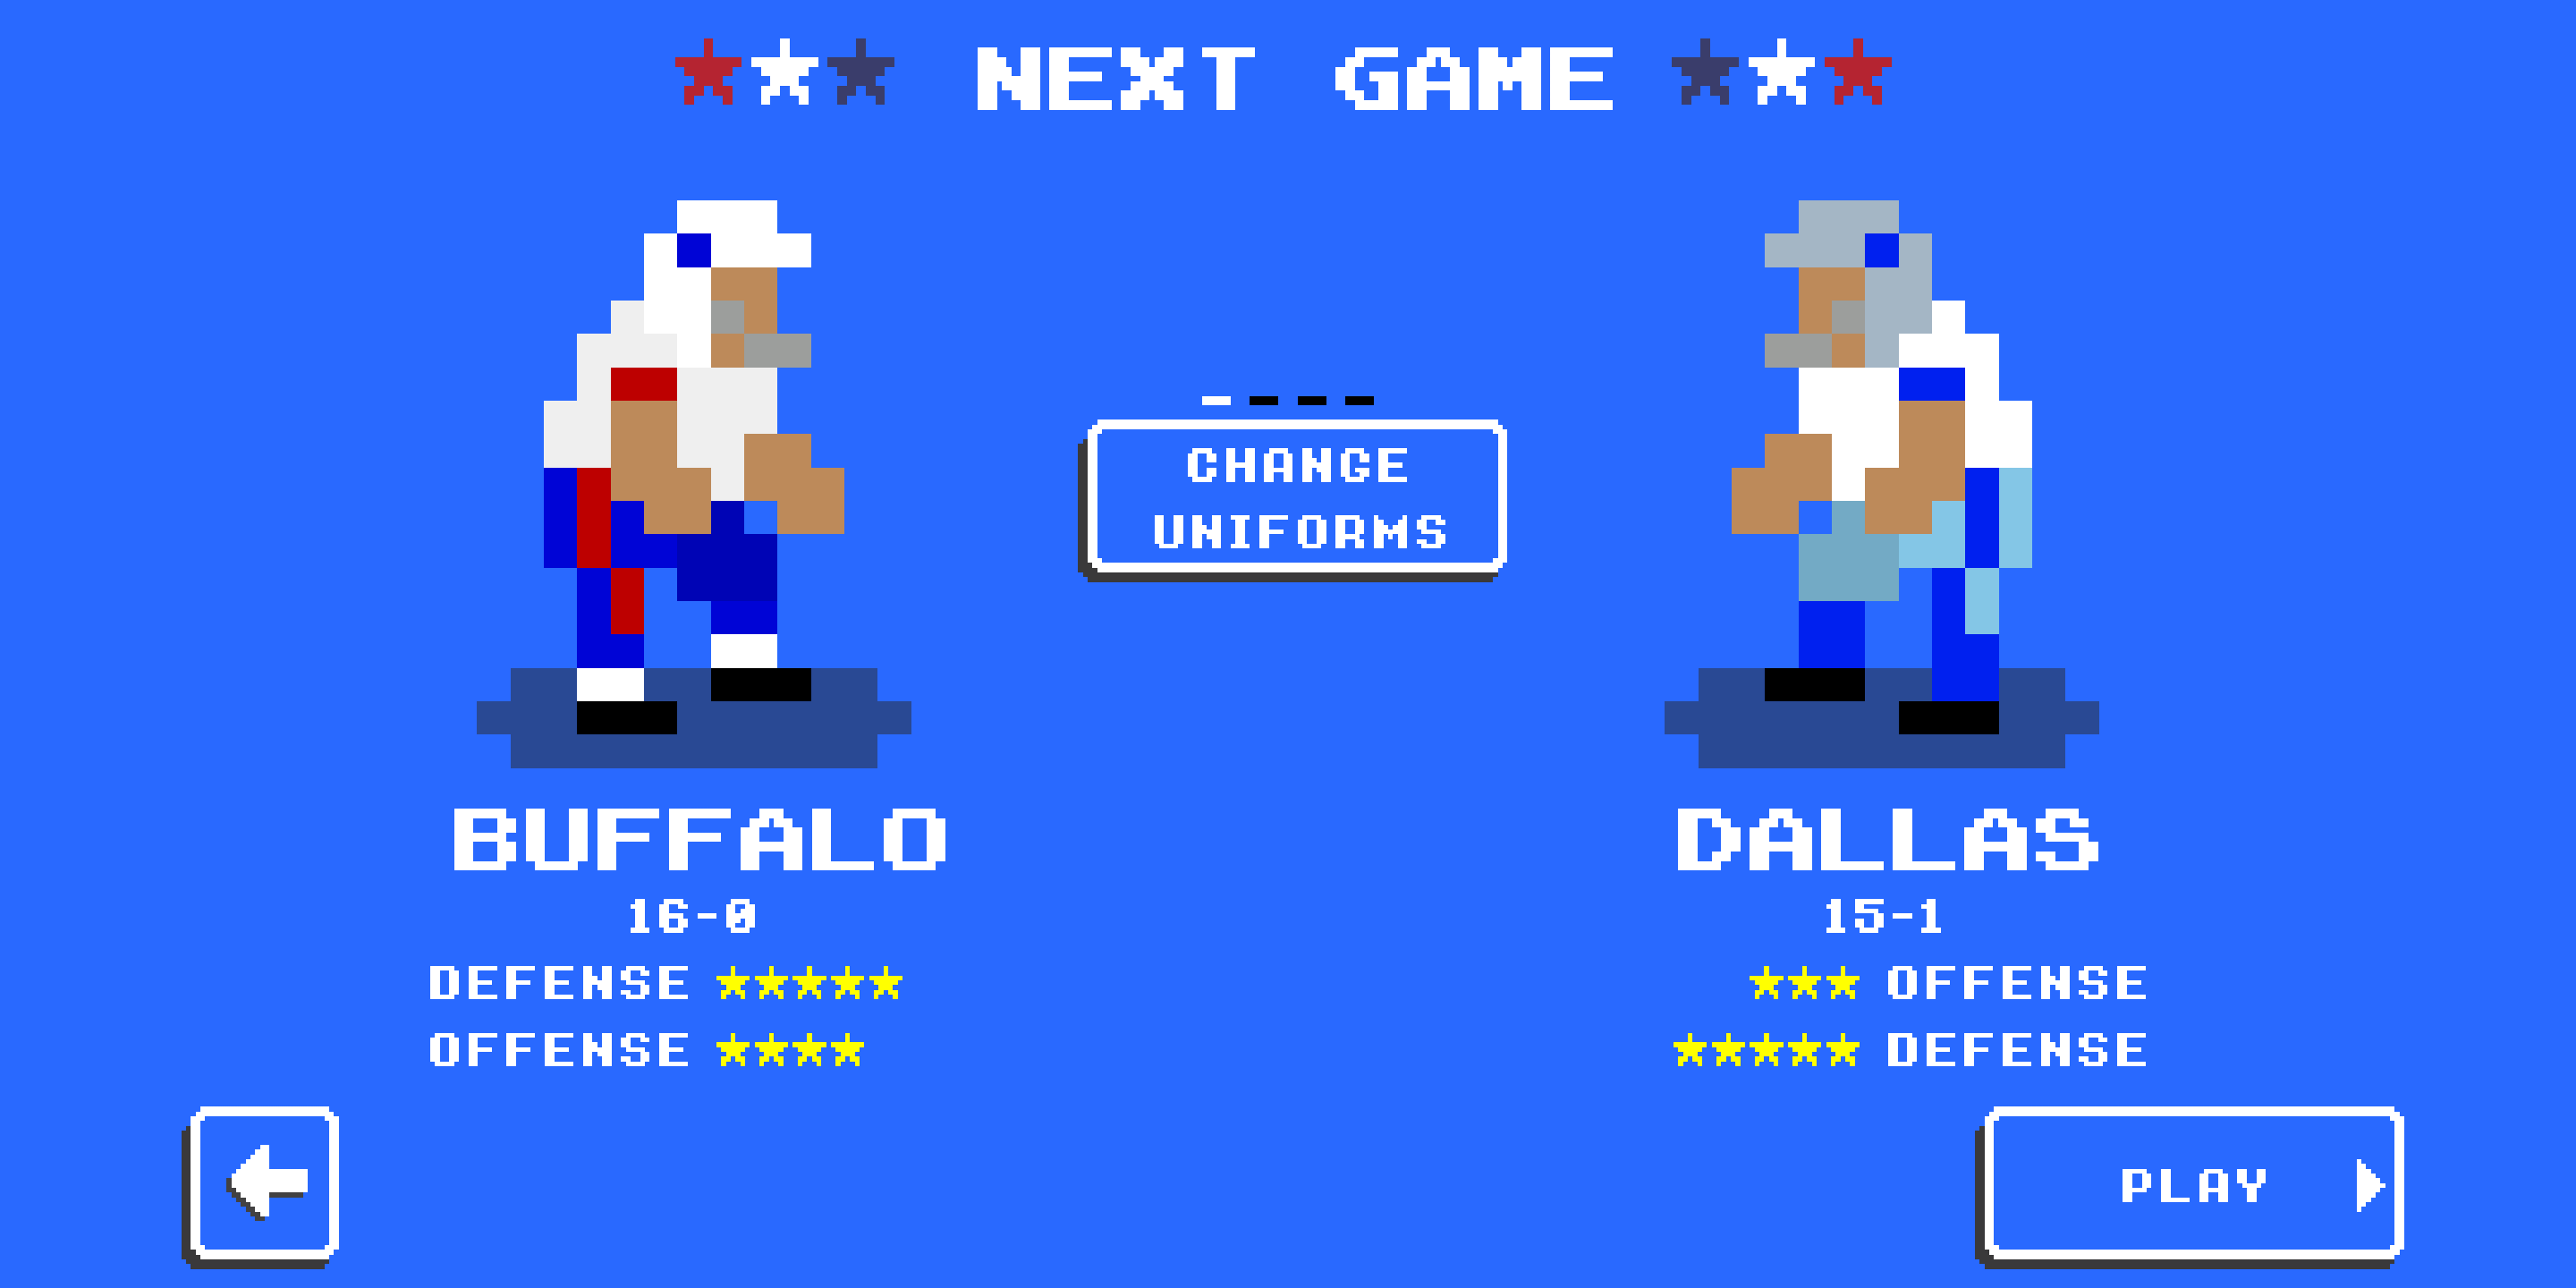 Retro Bowl College - Apps on Google Play